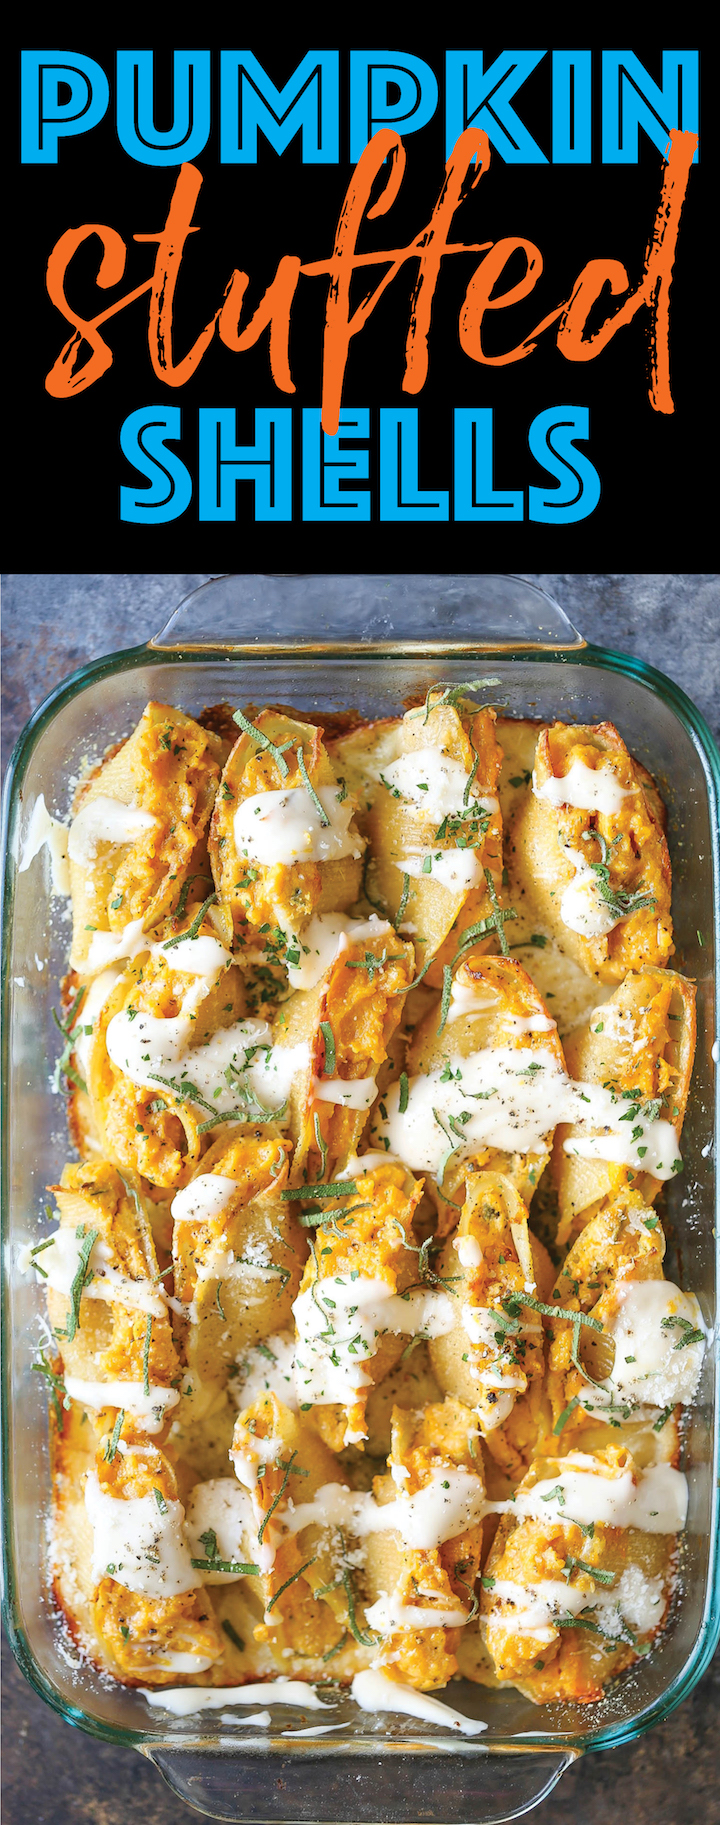 Pumpkin Stuffed Shells - Luxuriously creamy, rich and comforting with the most epic garlic parmesan cream sauce that you'll want to put on everything!